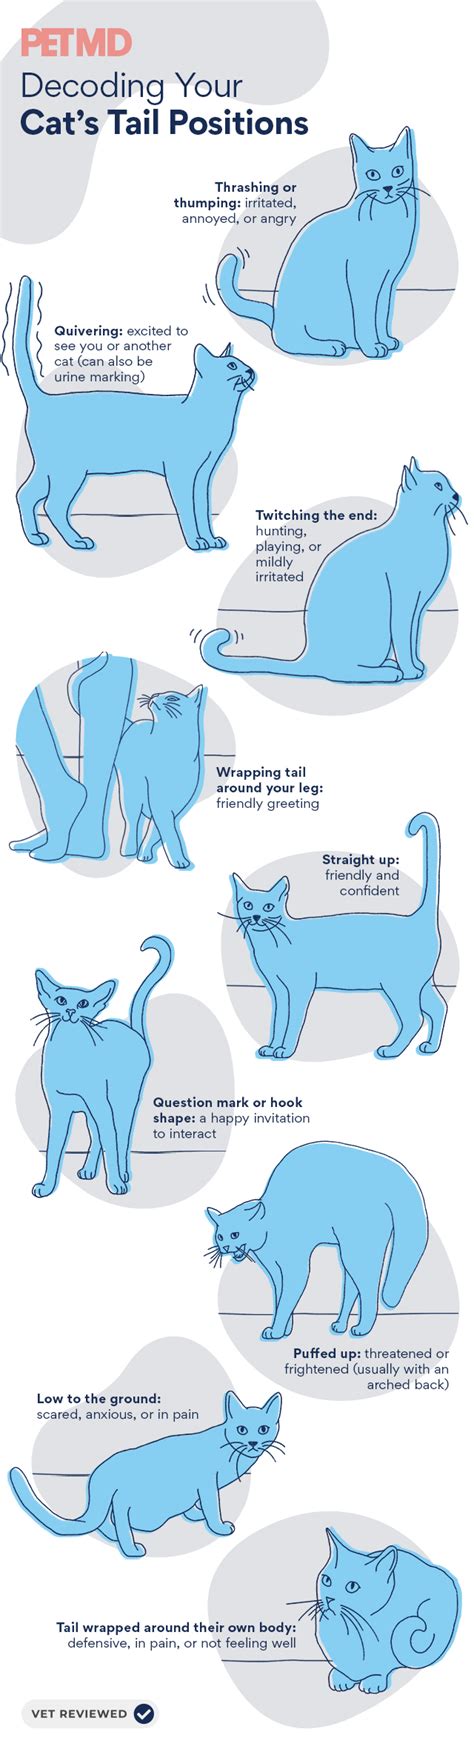 Cat Tail Language Why Cats Wag Their Tails And More PetMD Cat Tail Language Cat Tail